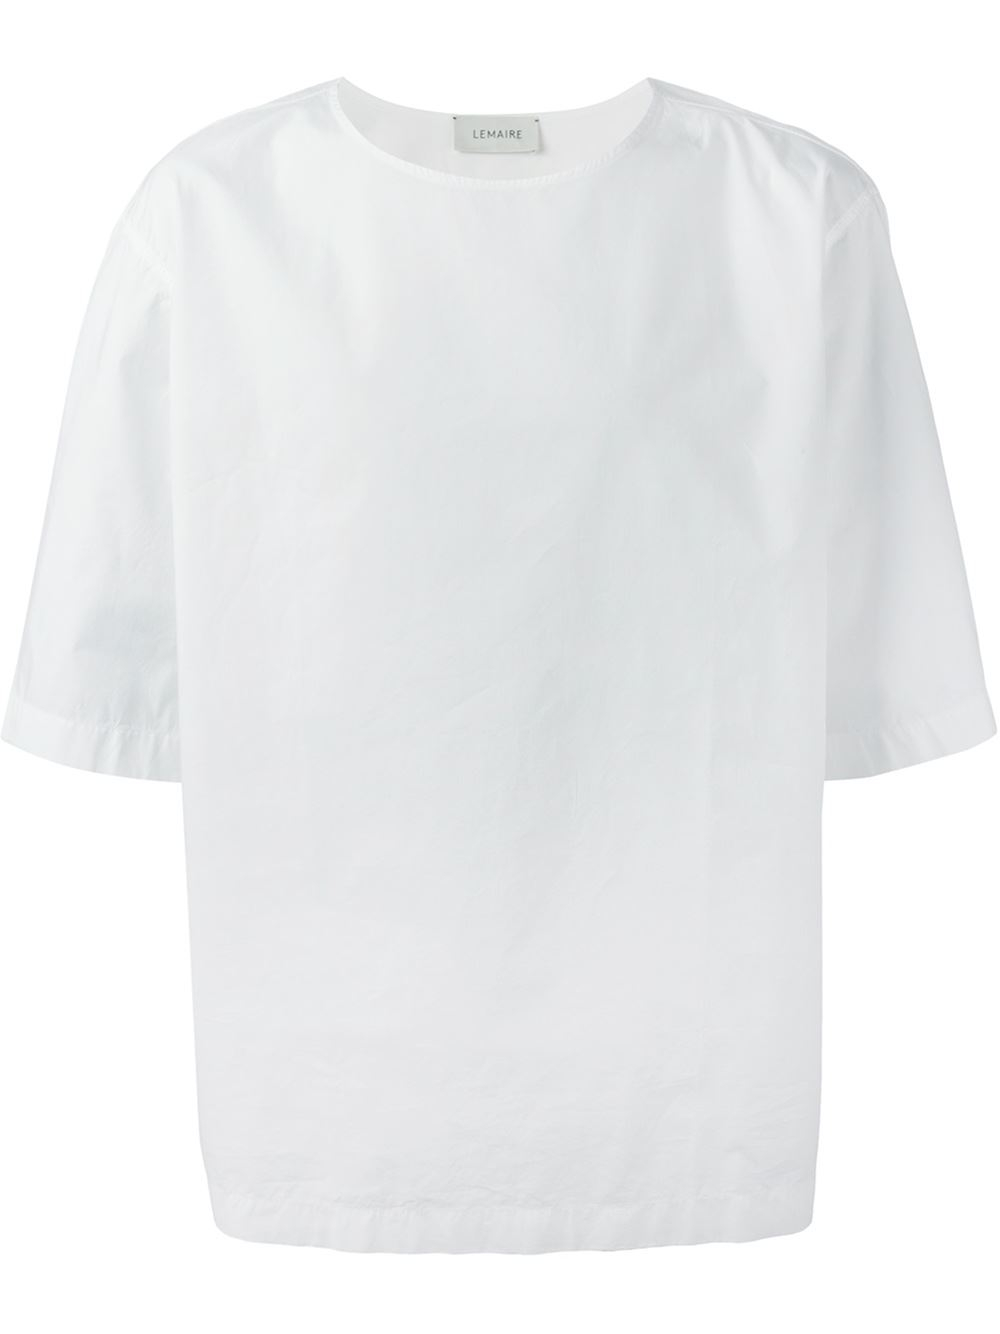 Lemaire Boxy-Fit T-Shirt in White for Men - Lyst